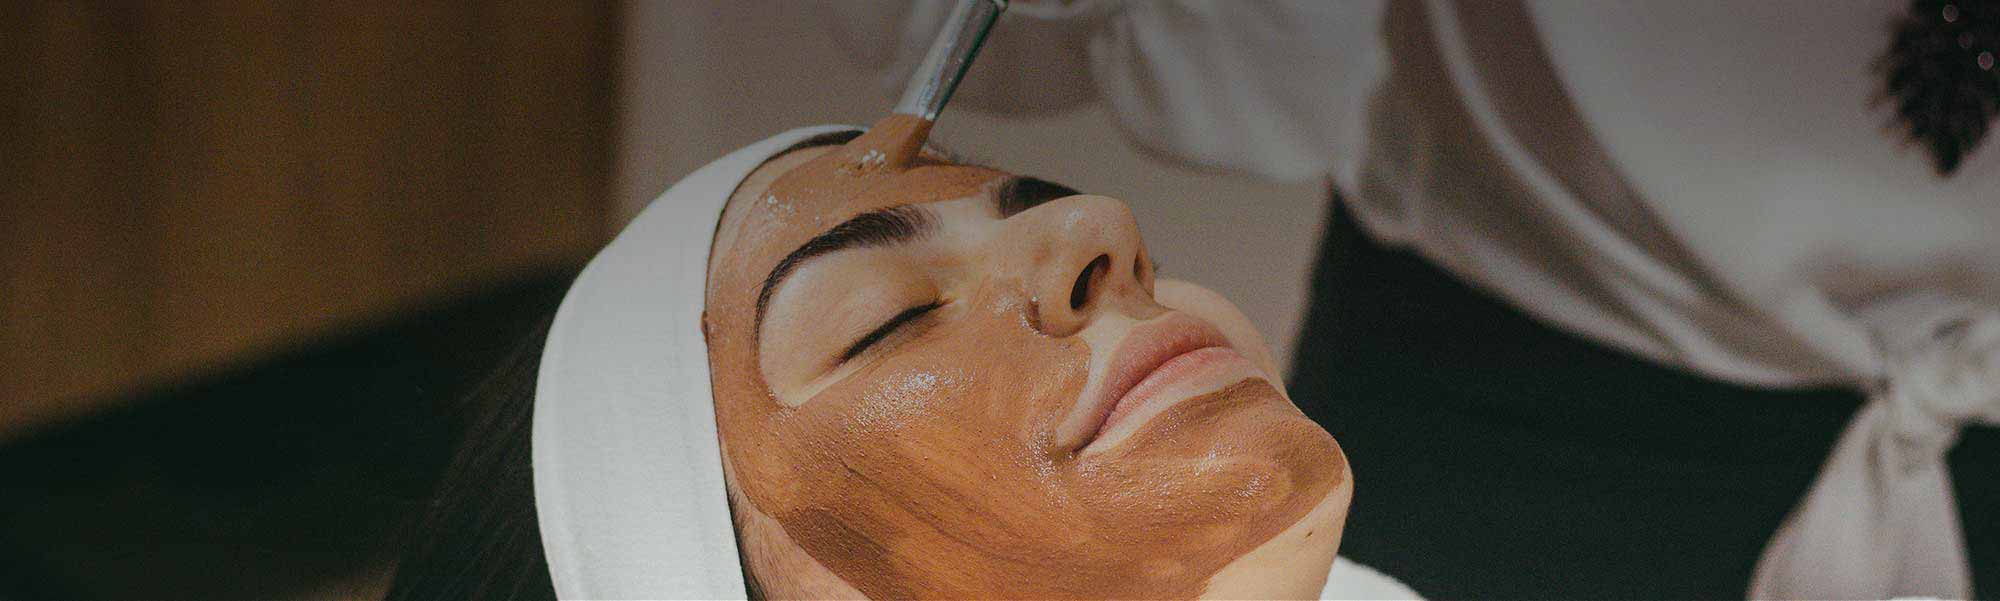 An Experience Beauty Clinic is located in the Melbourne CBD, providing beauty therapist and facial services